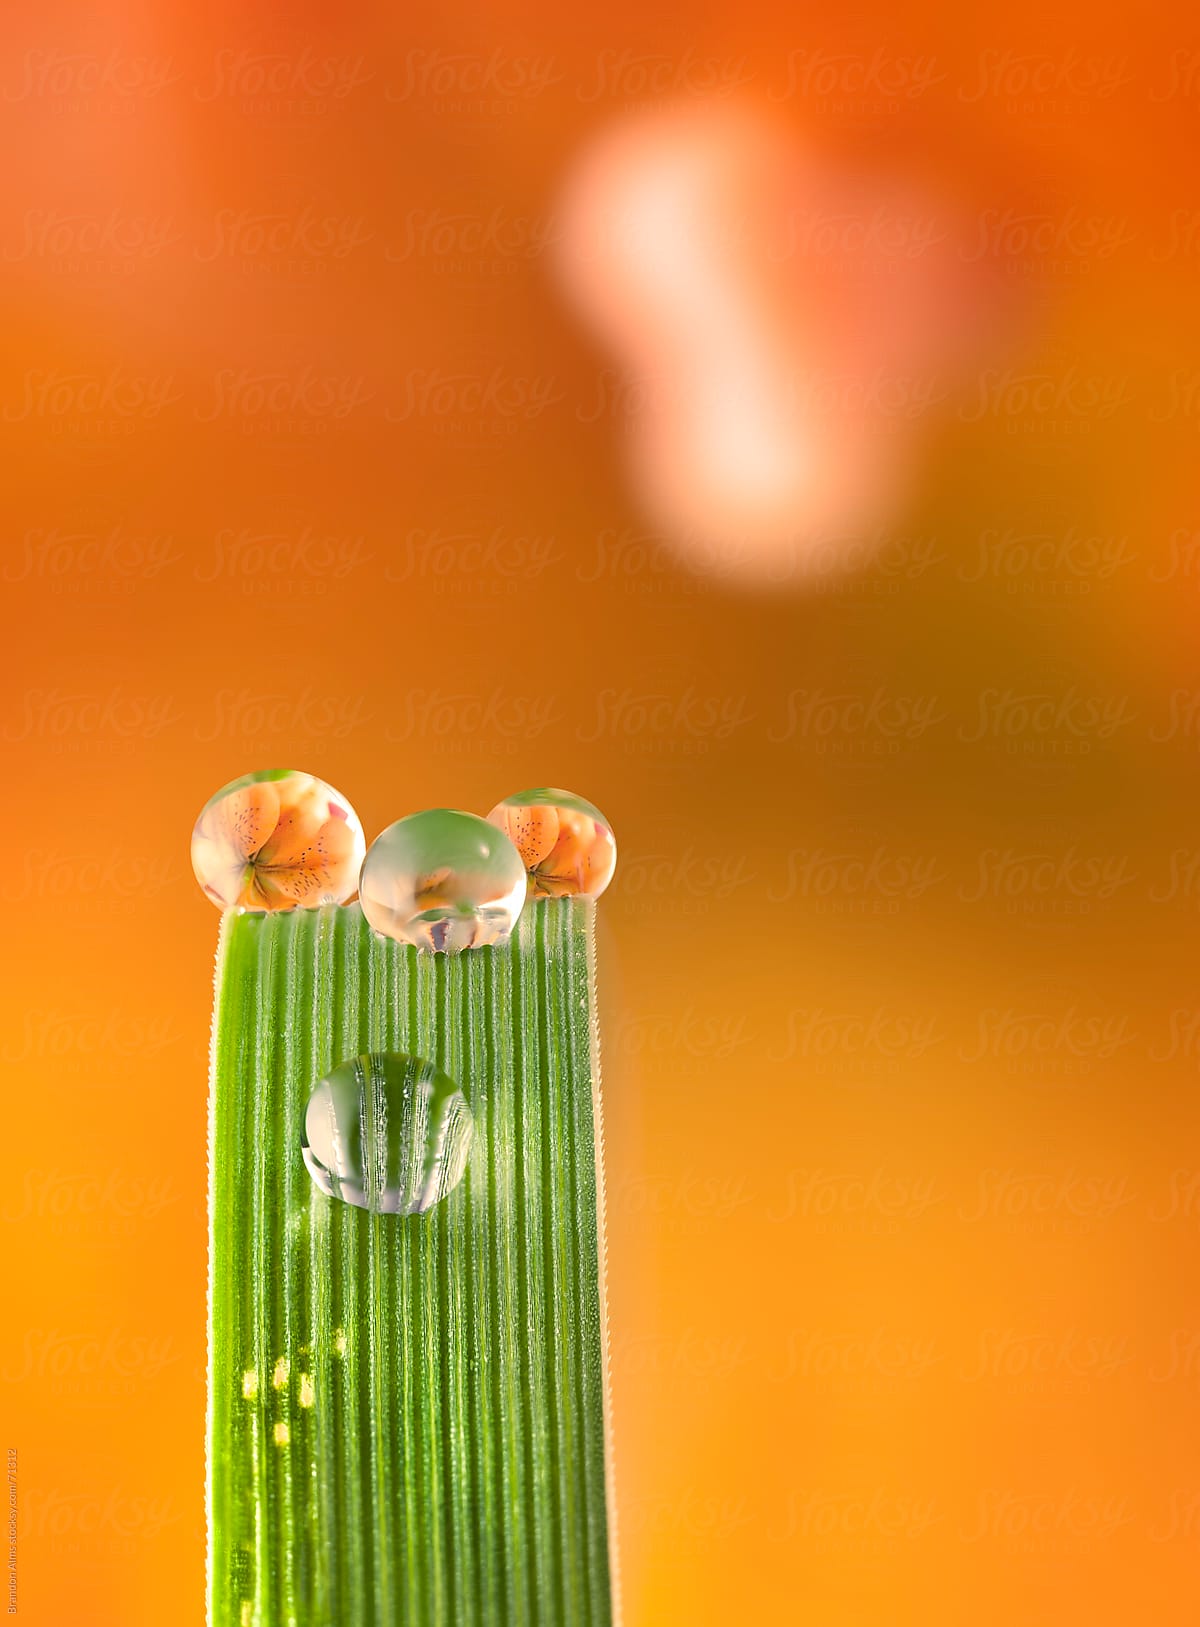 Dewdrop Refractions of a Orange Lily on a Blade of Grass